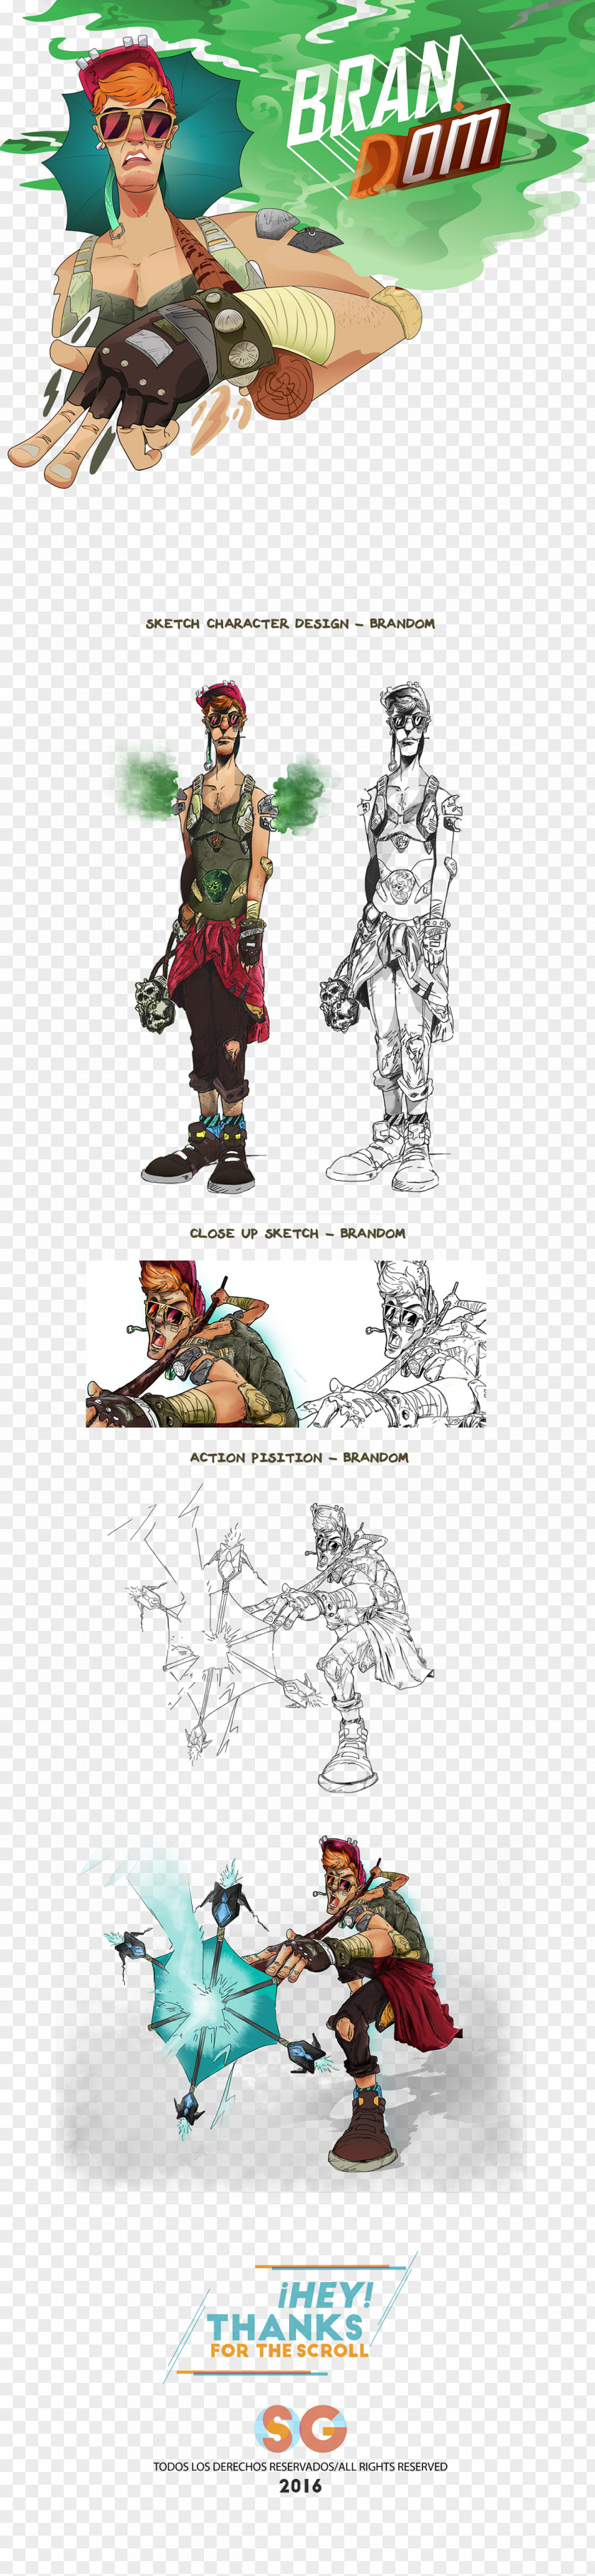 Creative Illustration Design Animated Cartoon Poster Character PNG